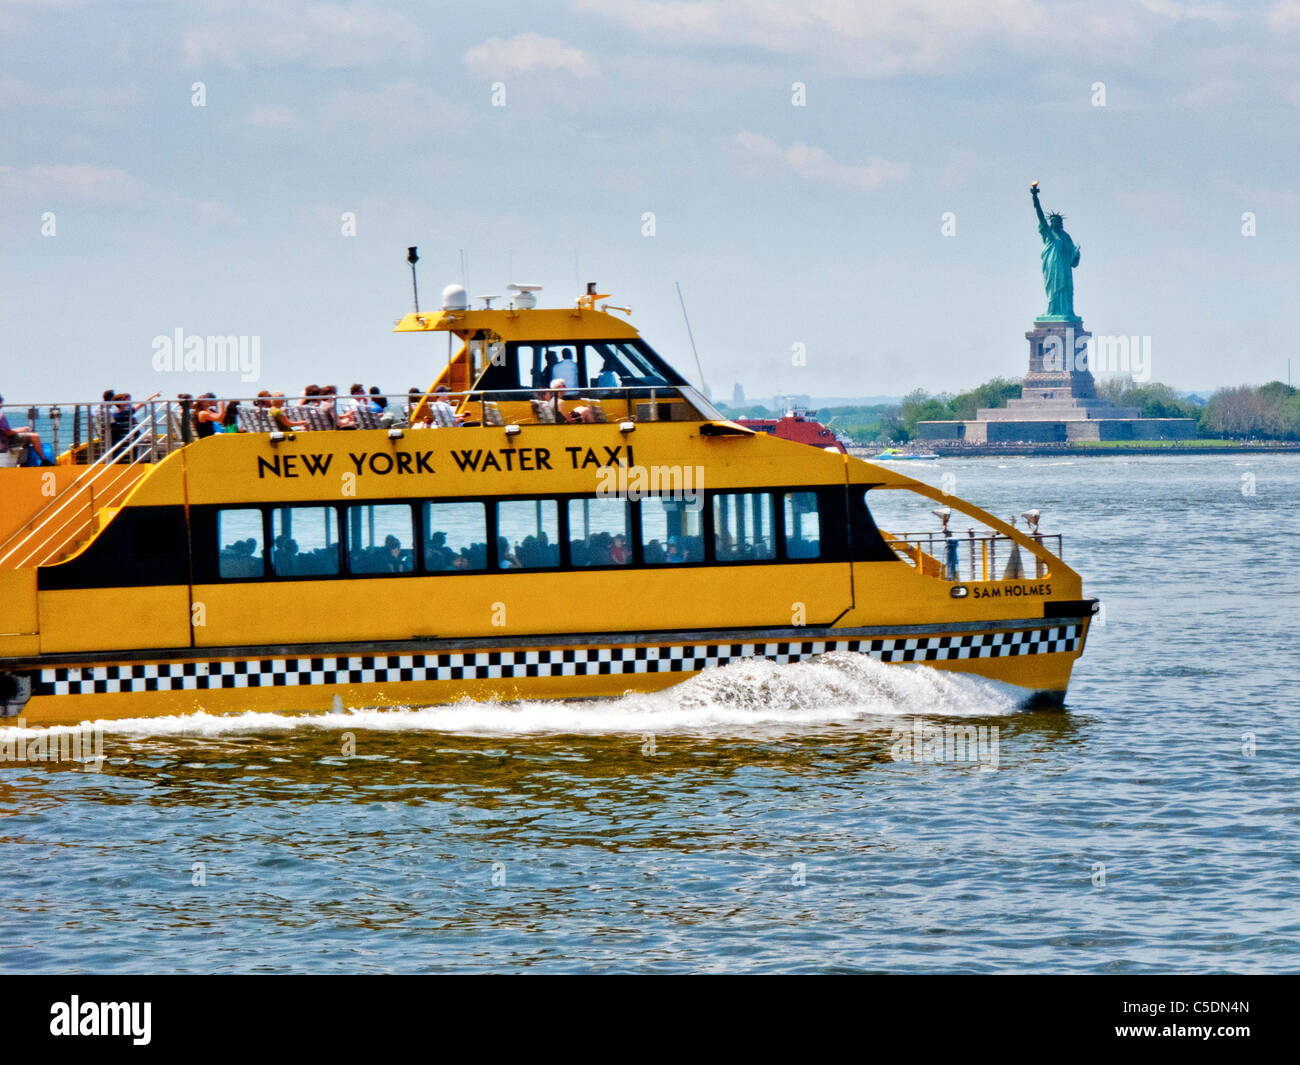 The New York Water Taxi Sam Holmes passes the Statue of Liberty in New York Harbor, and is based in Red Hook, Brooklyn. Stock Photo